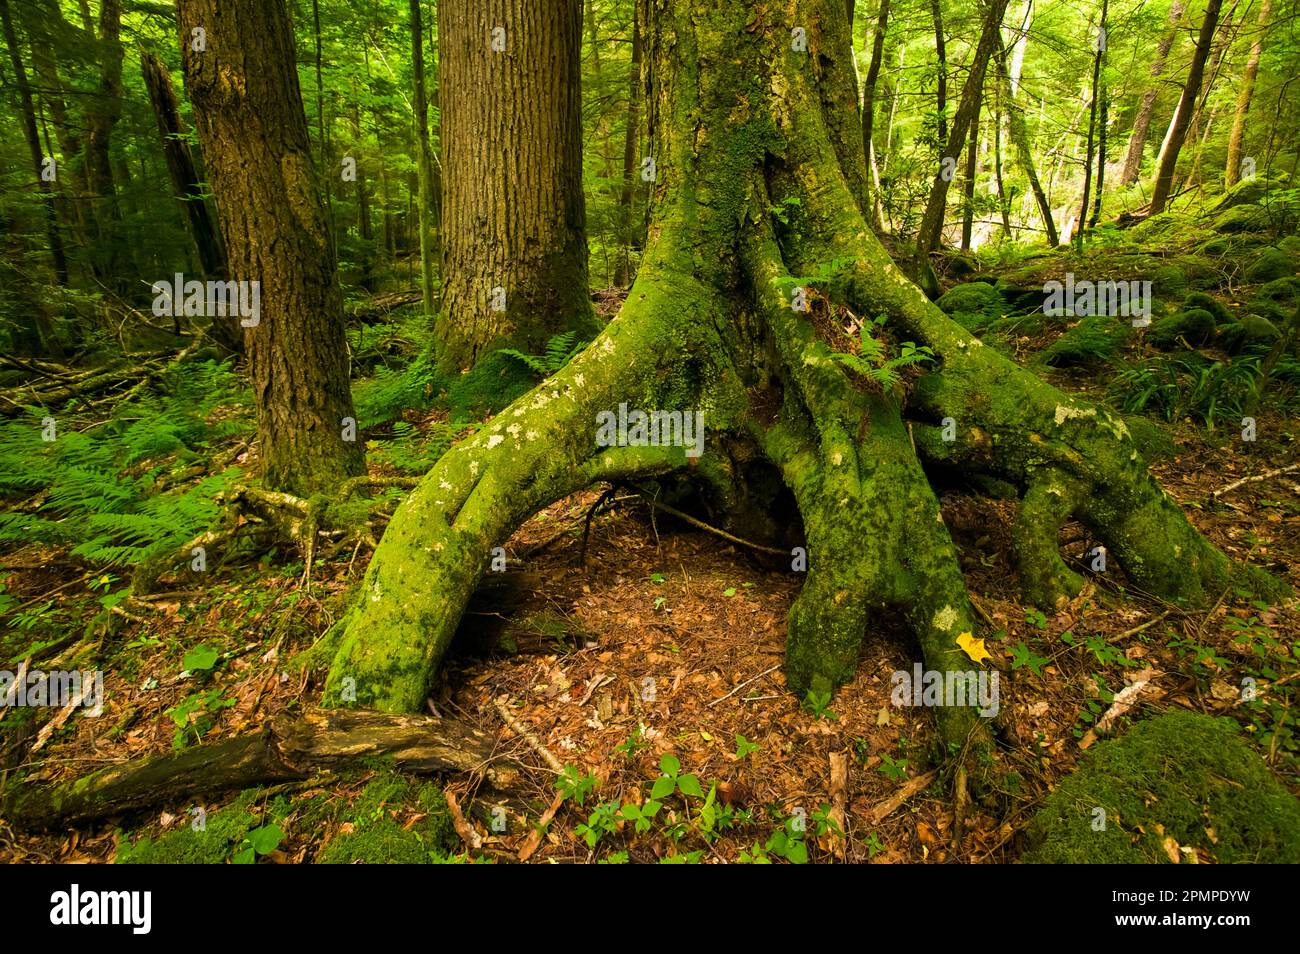 Moss-covered tree roots grip the soil in a forest in Great Smoky Mountains National Park, Tennessee, USA; Tennessee, United States of America Stock Photo